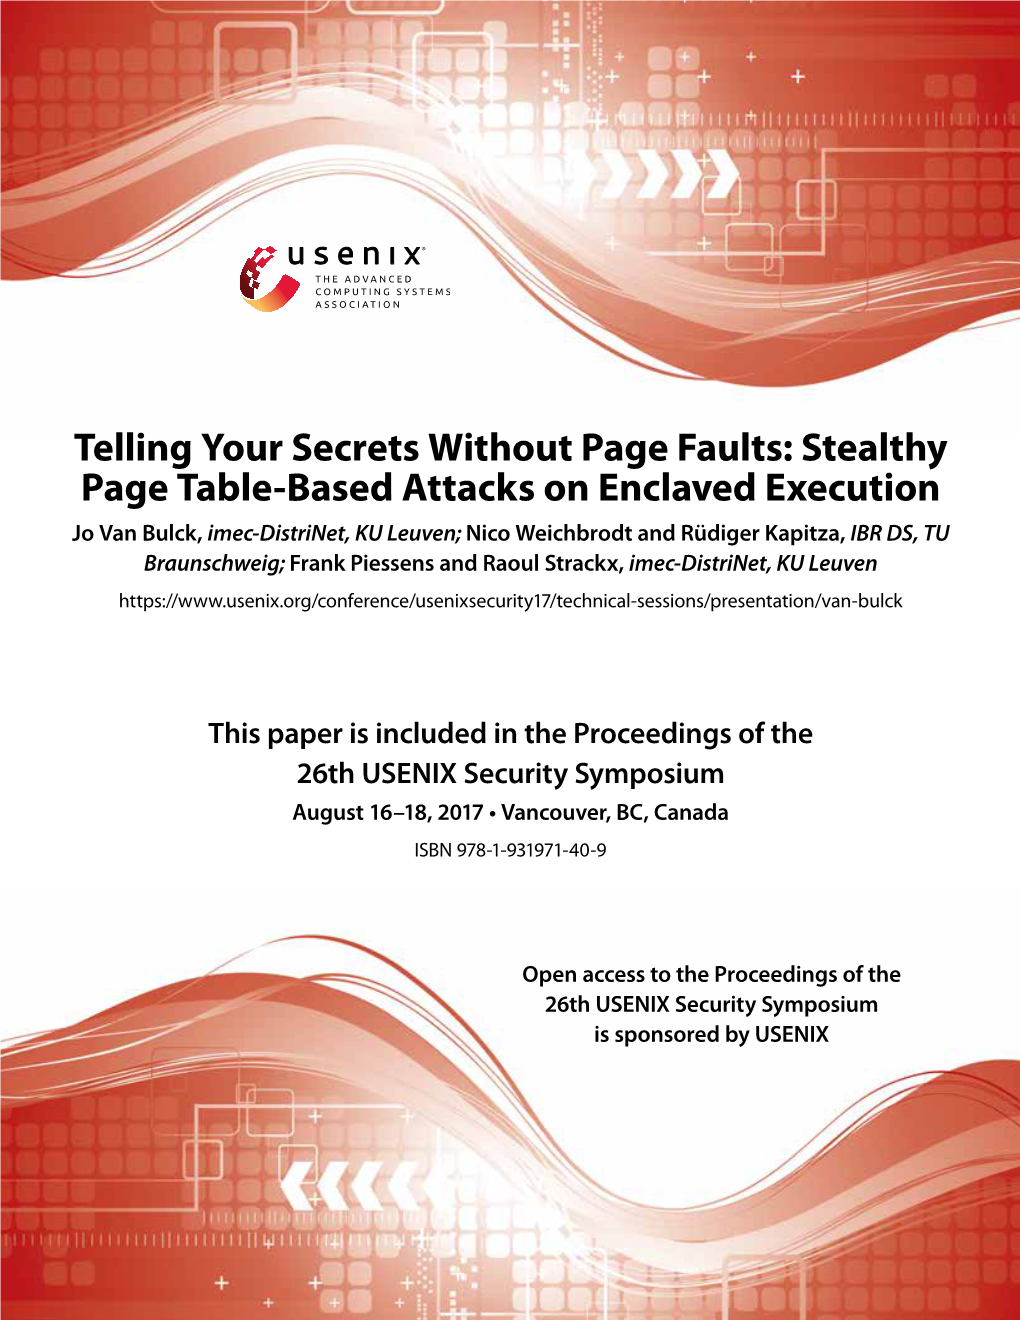 Stealthy Page Table-Based Attacks on Enclaved Execution